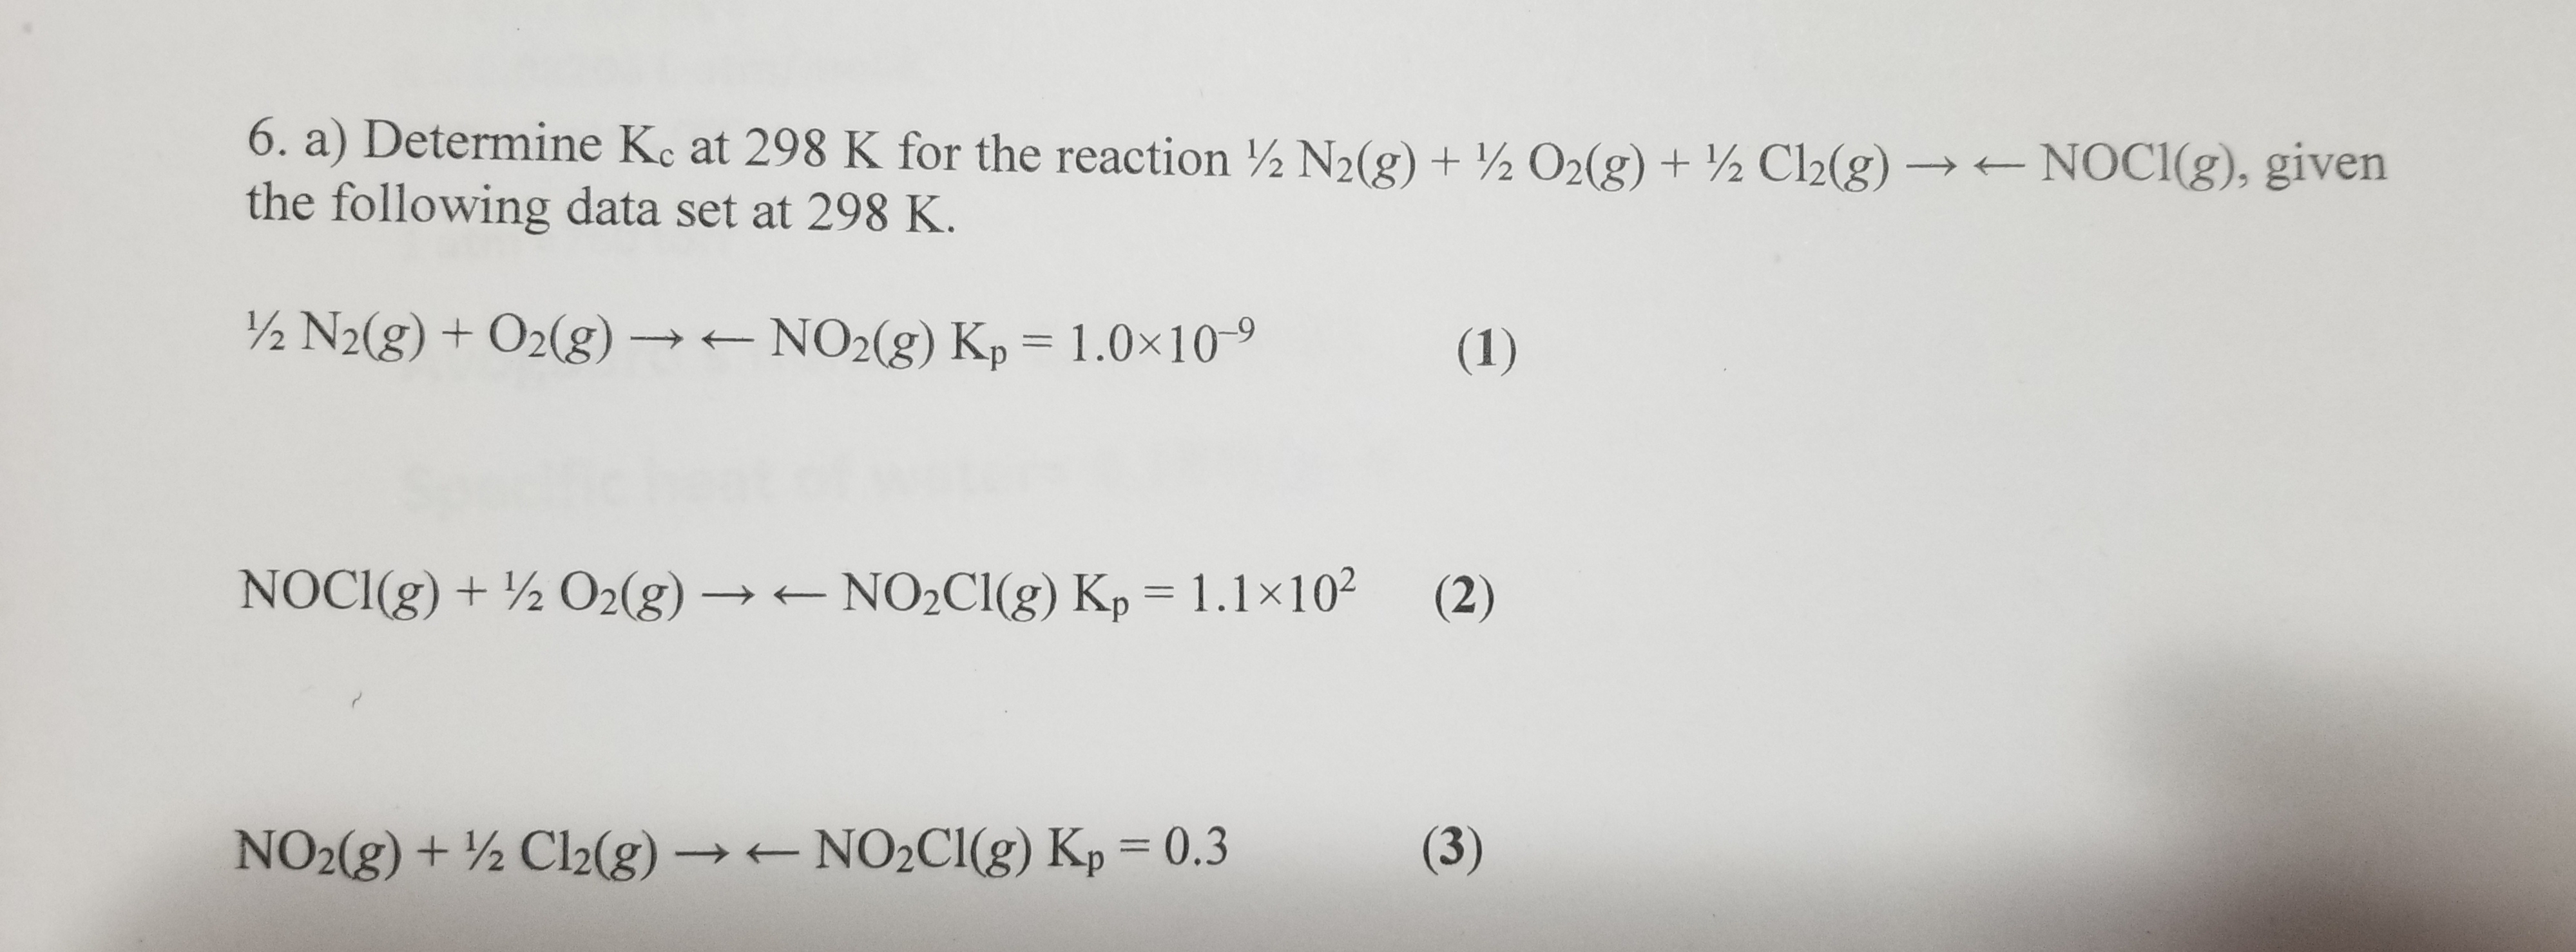 6. a) Determine Ke at 298 K for the reaction ½ N2(g) + ½ O2(g) + ½ Cl2(g) → NOCI(g), given
the following data set at 298 K.
½ N2(g) + O2(g) → NO2(g) Kp = 1.0×10-9
(1)
%3D
NOCI(g) + ½ O2(g) → NO2C1(g) Kp = 1.1×102
(2)
%3D
NO2(g) + ½ Cl2(g) → NO2C1(g) Kp = 0.3
(3)
